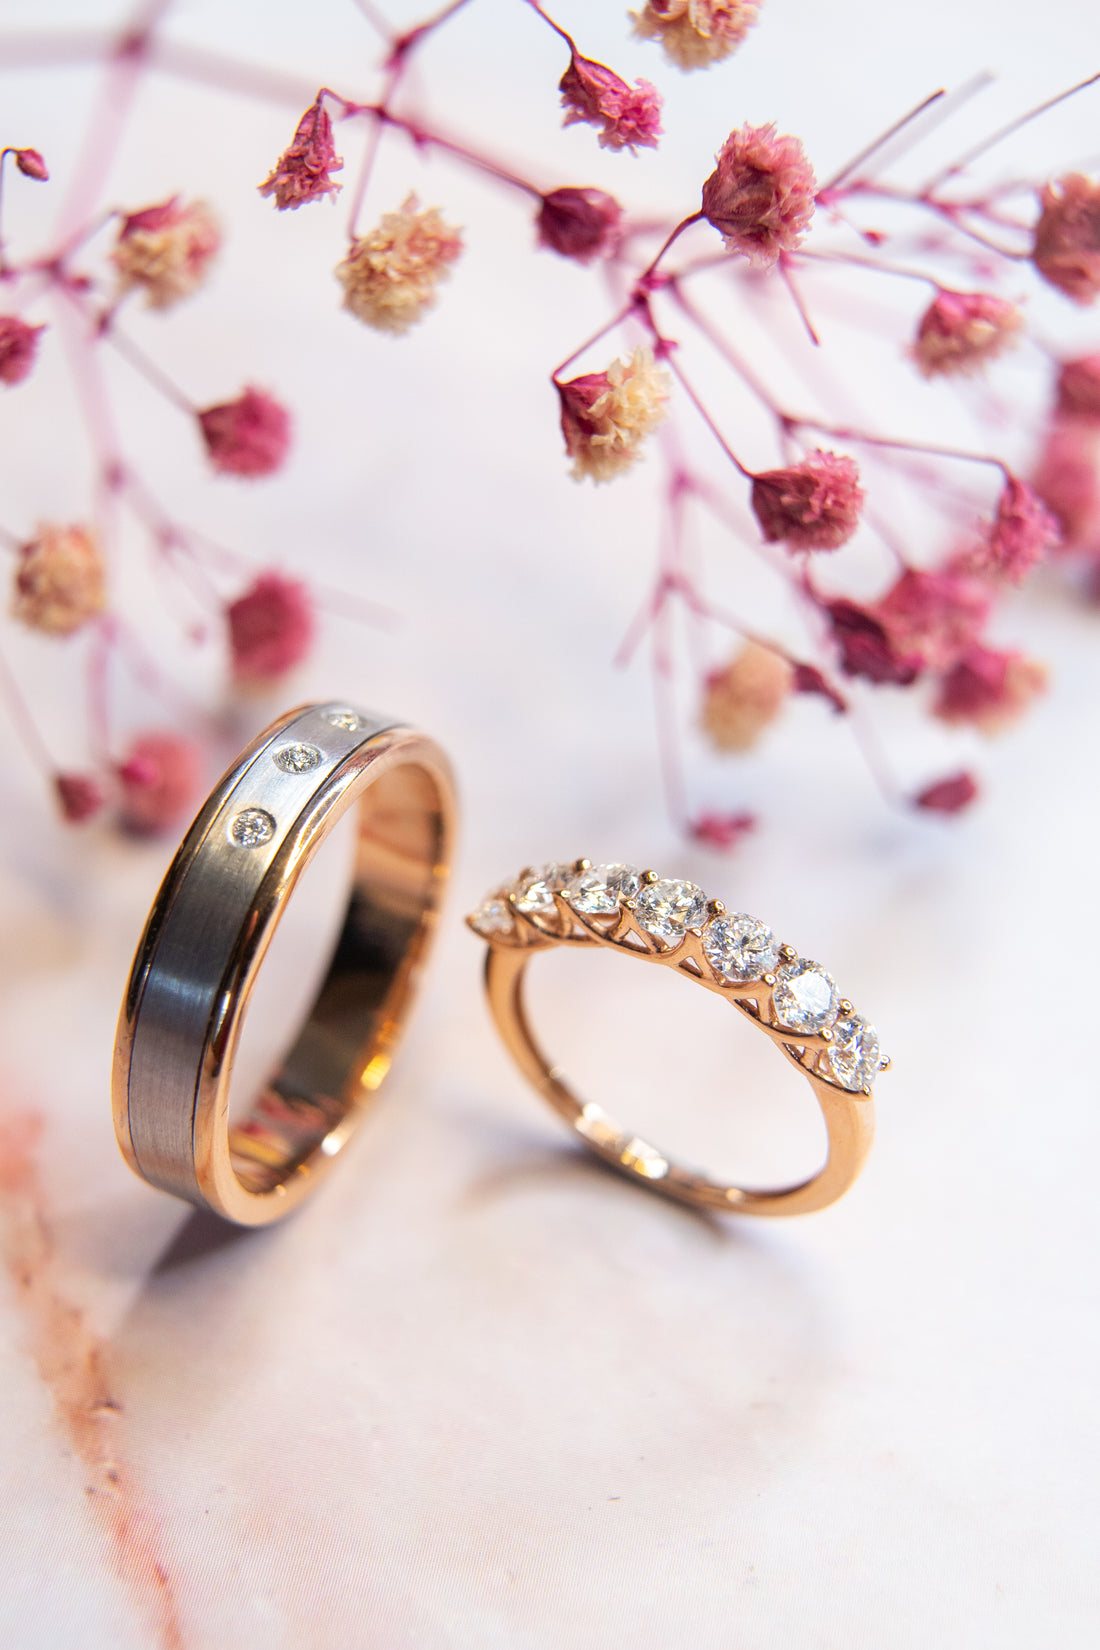 Three ways to pick the perfect wedding rings